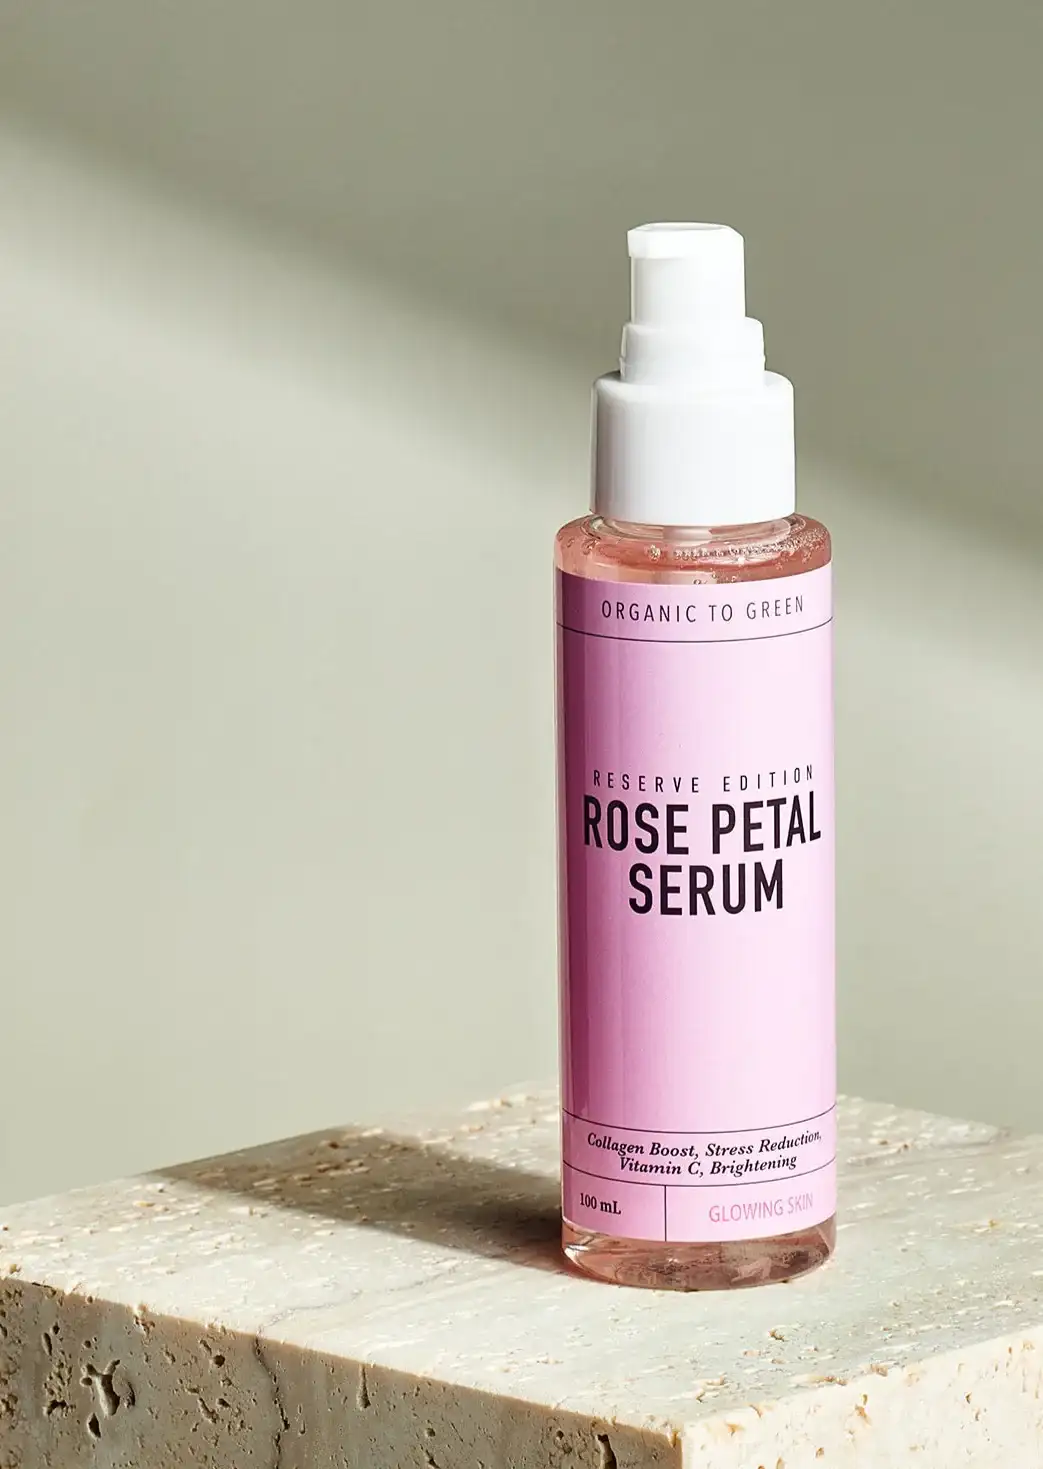 Image of ROSE PETAL SERUM - RESERVE EDITION – FOR GLOWING SKIN - COLLAGEN BOOST, STRESS REDUCTION & VITAMIN C BRIGHTENING